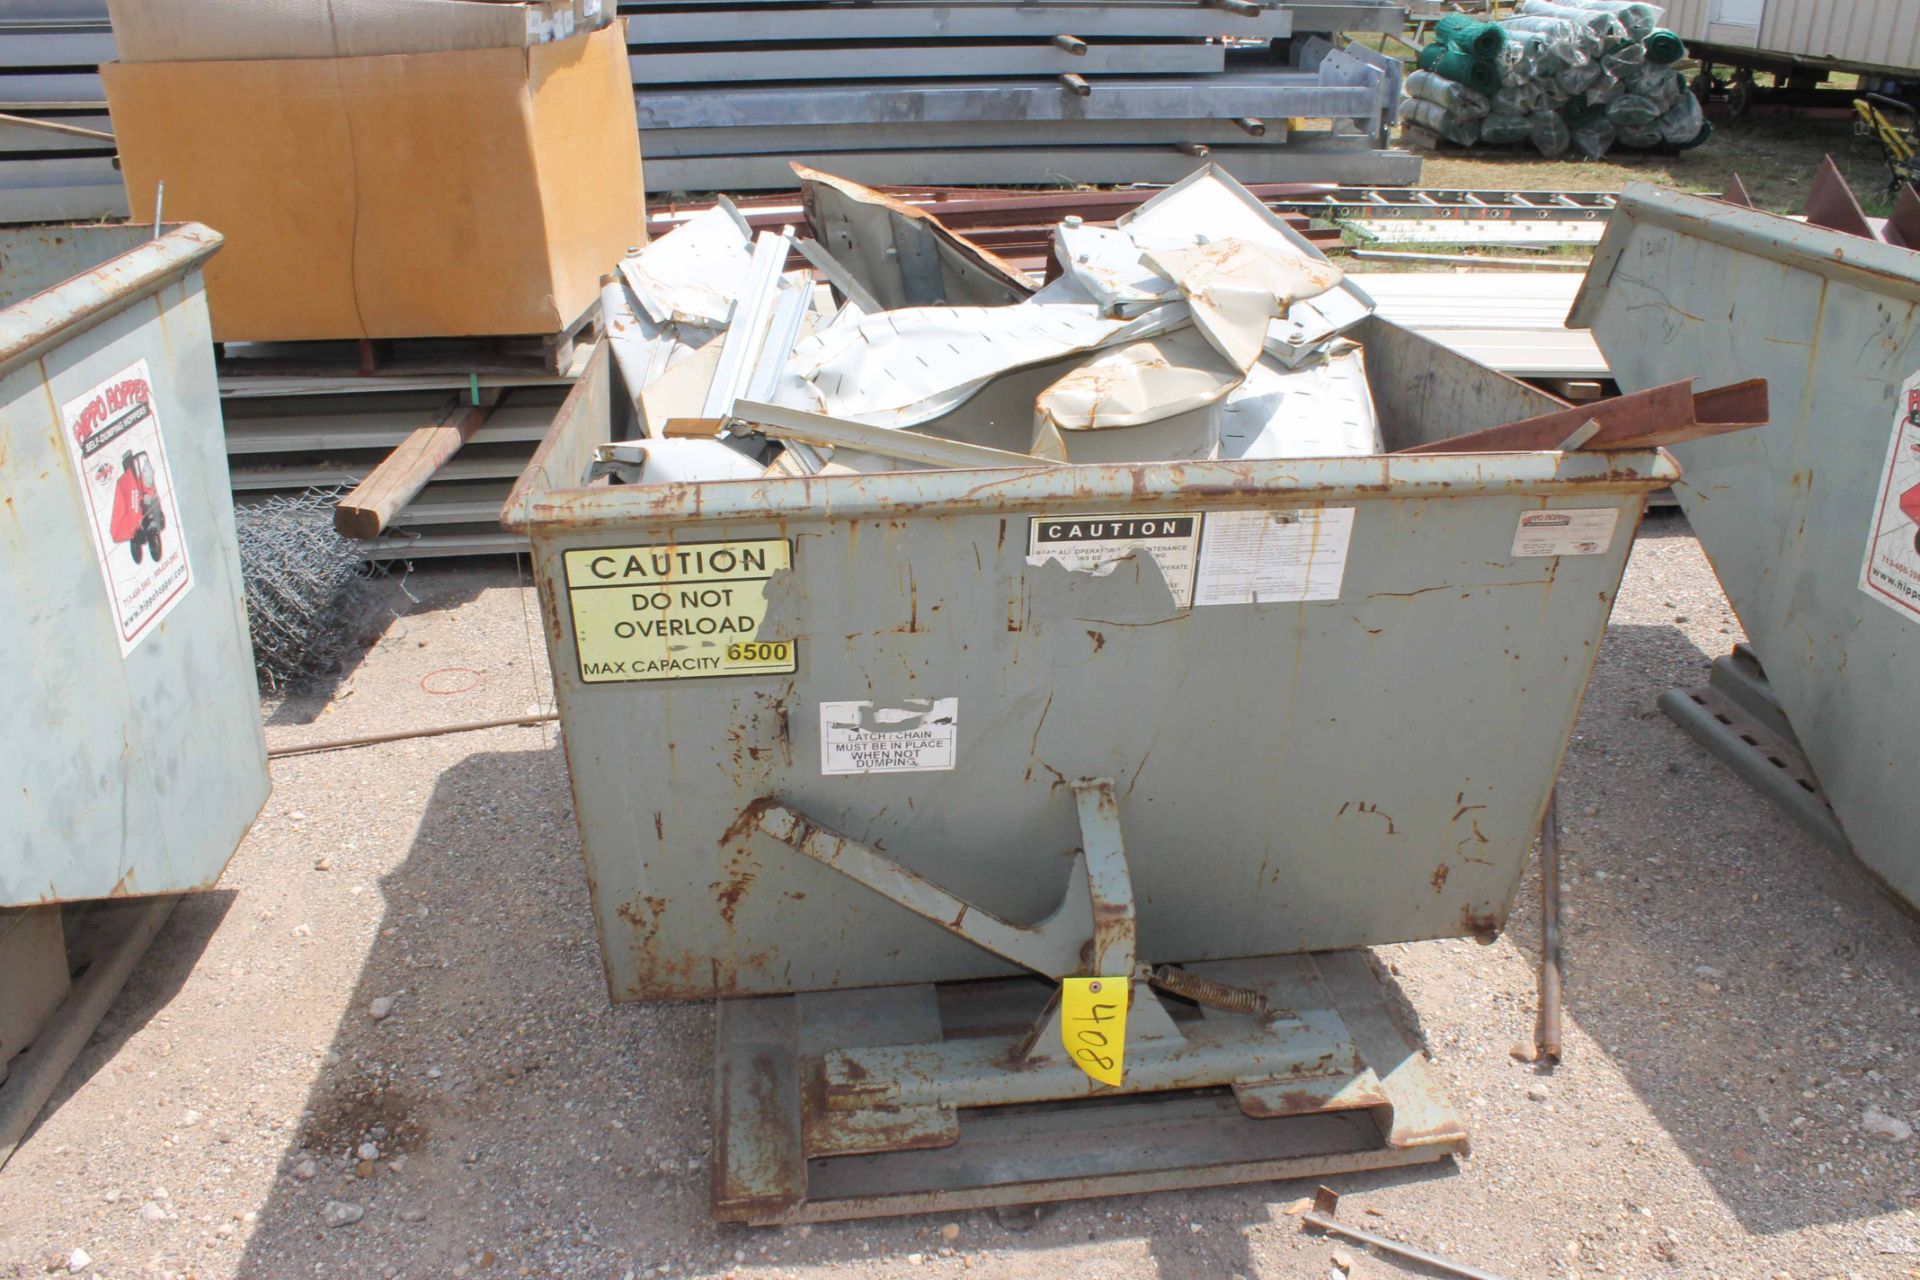 FORKLIFT TYPE DUMP HOPPER, HIPPO HOPPER (Sold by photo. Located offsite at 330 Business 290 East,